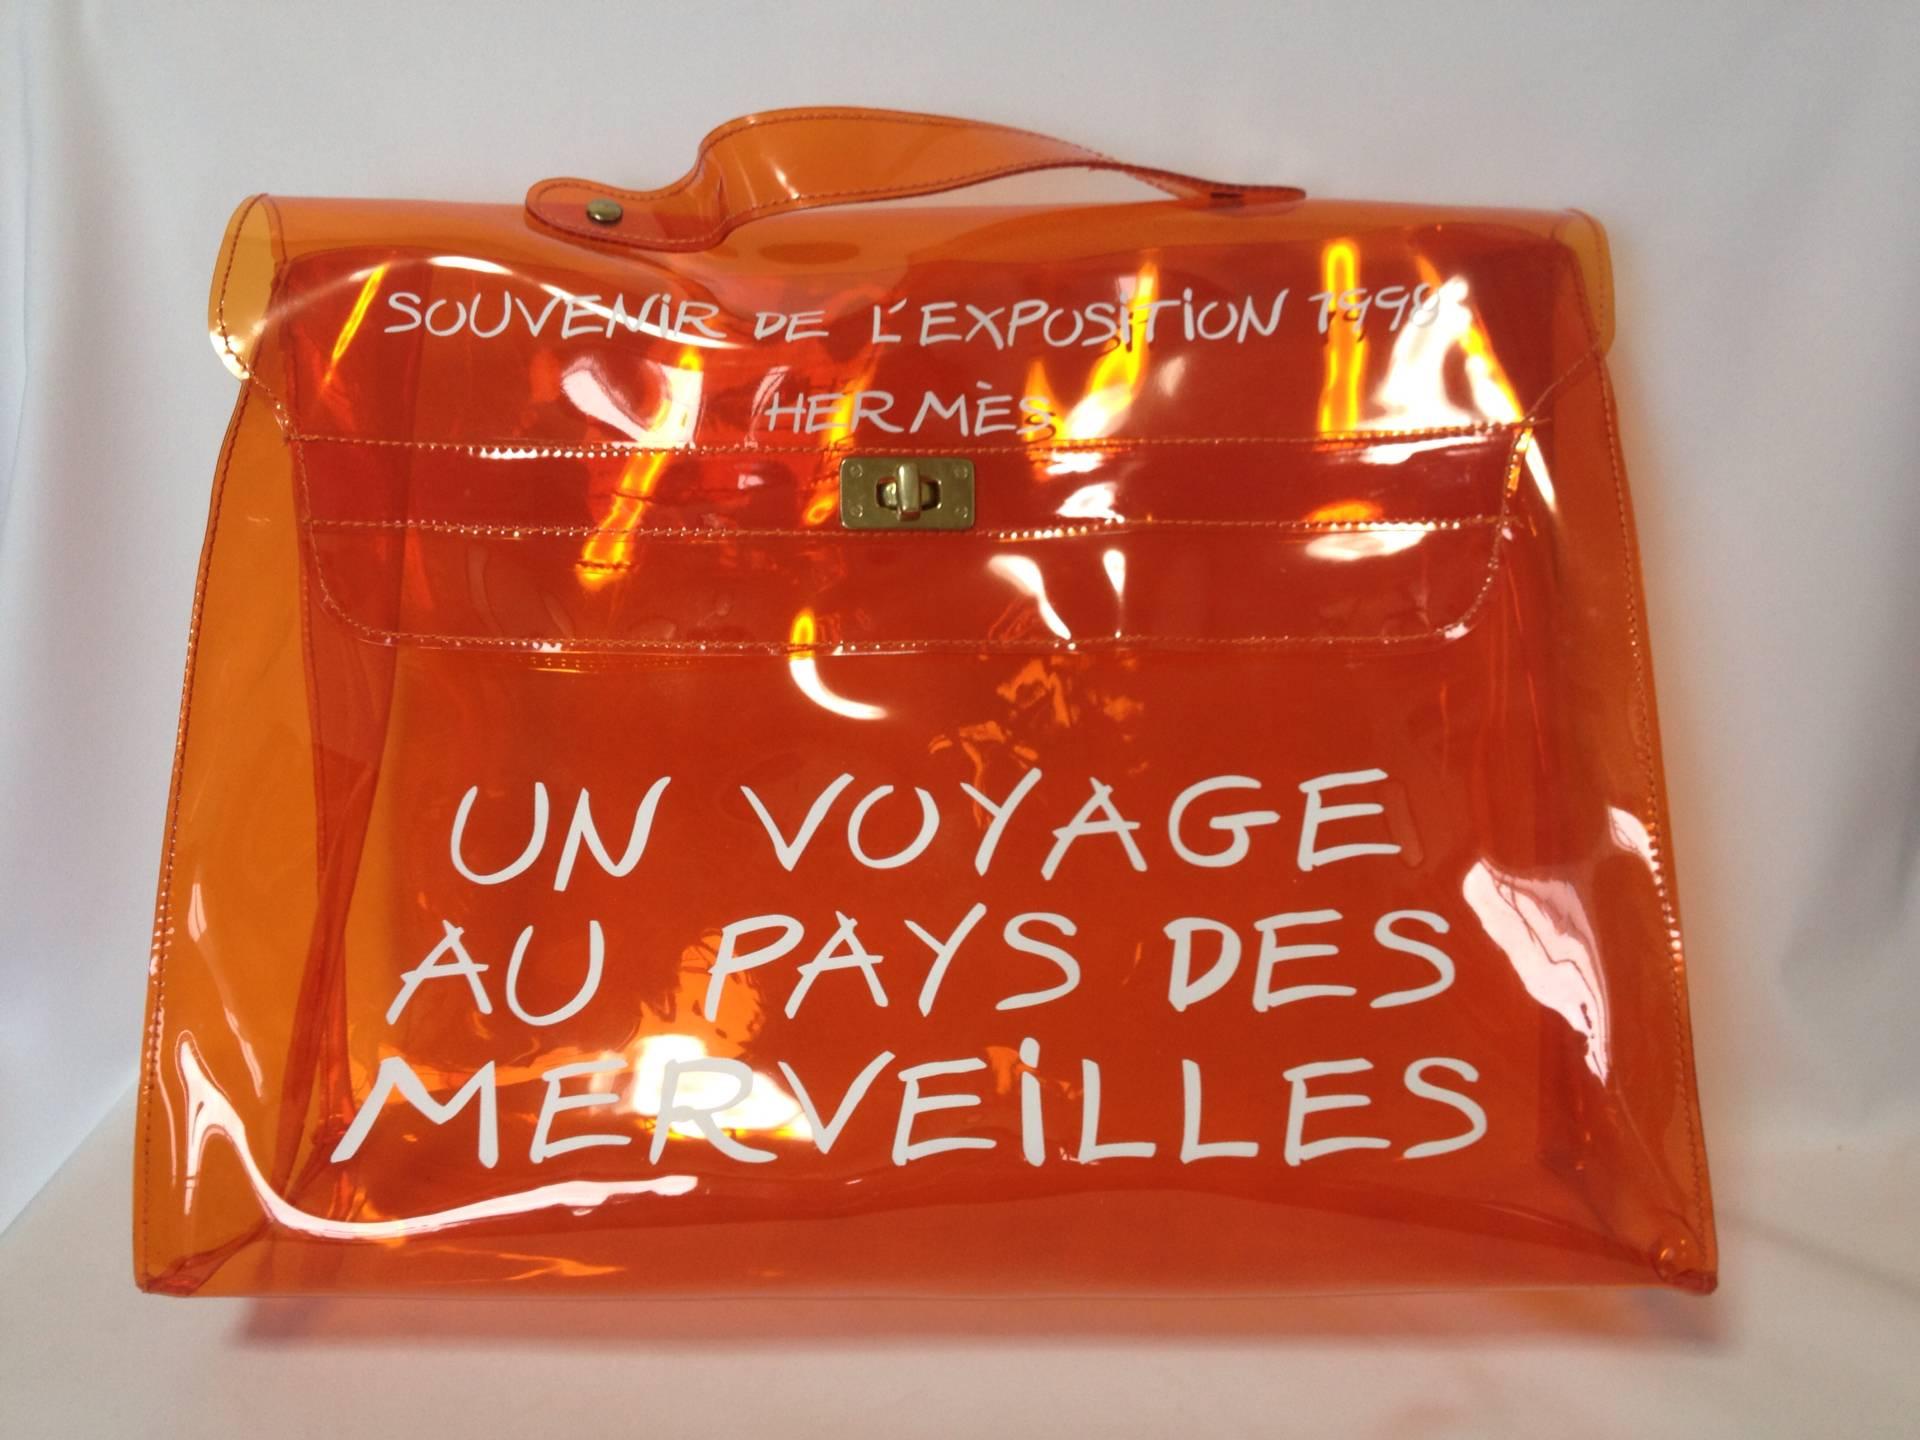 MINT condition. Hermes a rare transparent Vintage orange vinyl Kelly bag Japan Limited Edition, Japan Department Store.

SPECIAL piece for Hermes vintage collector or lover! 
Don't miss!!

This is a MINT conditioned, orange vinyl Kelly bag from